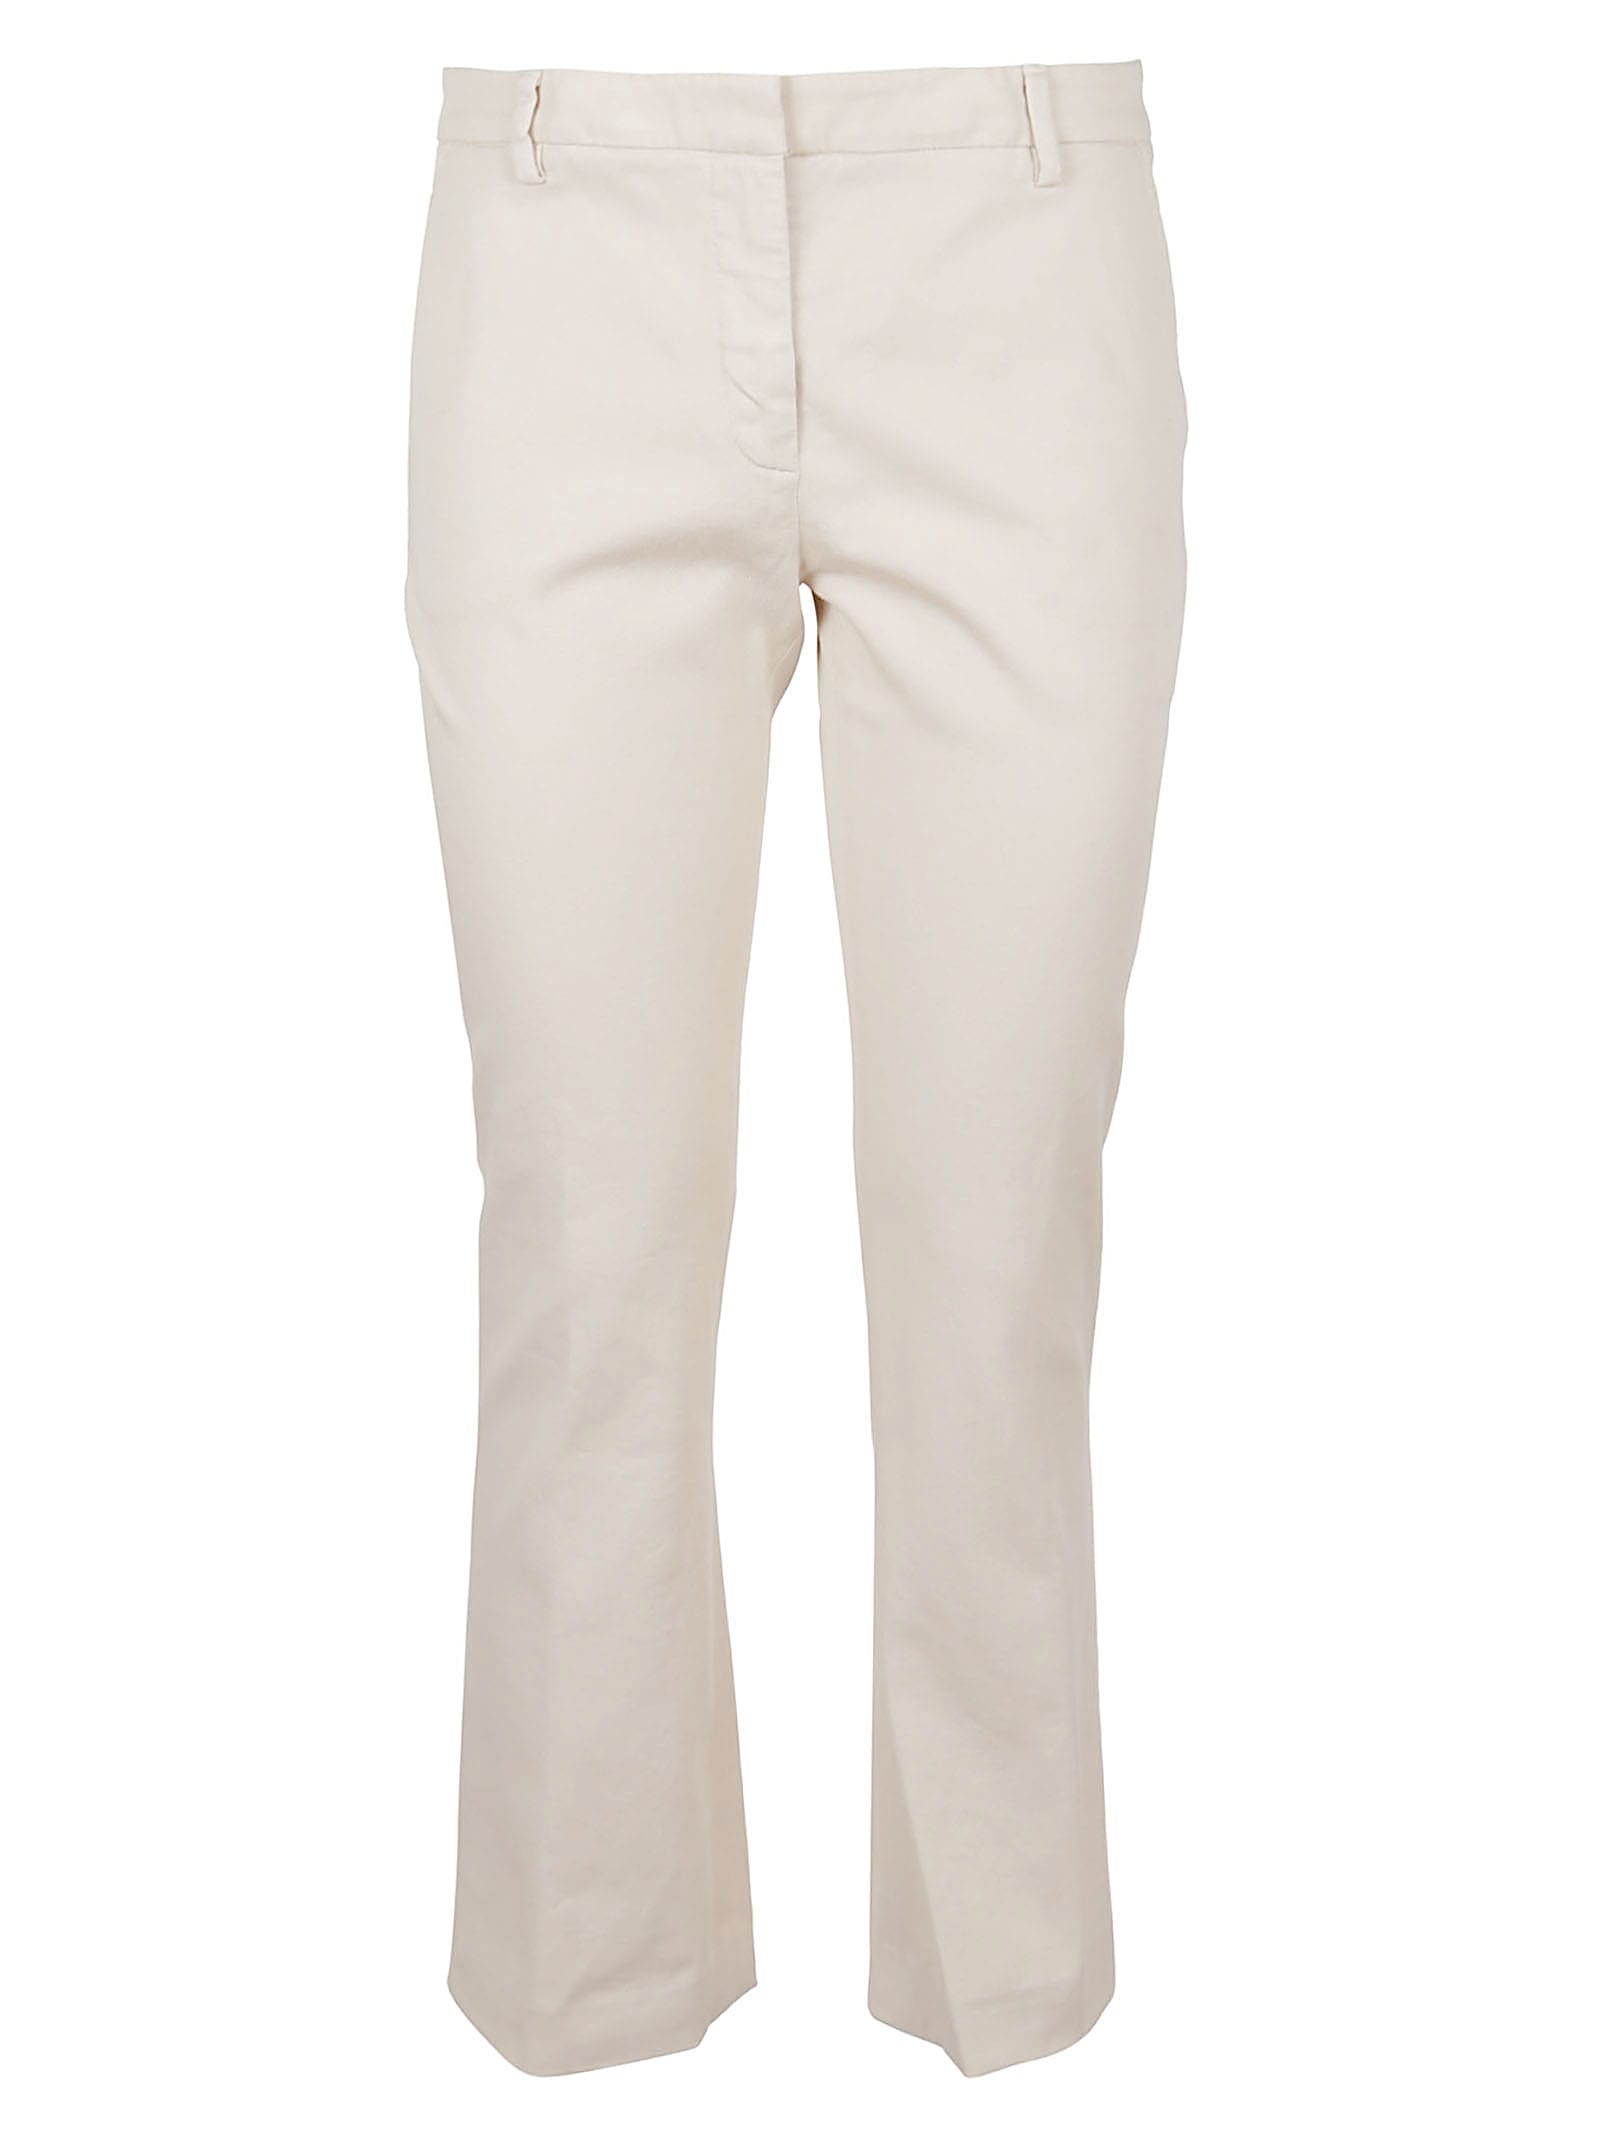 TRUE ROYAL ECO DYED BULL PANTS,T152.707 ROSS 009 IVORY